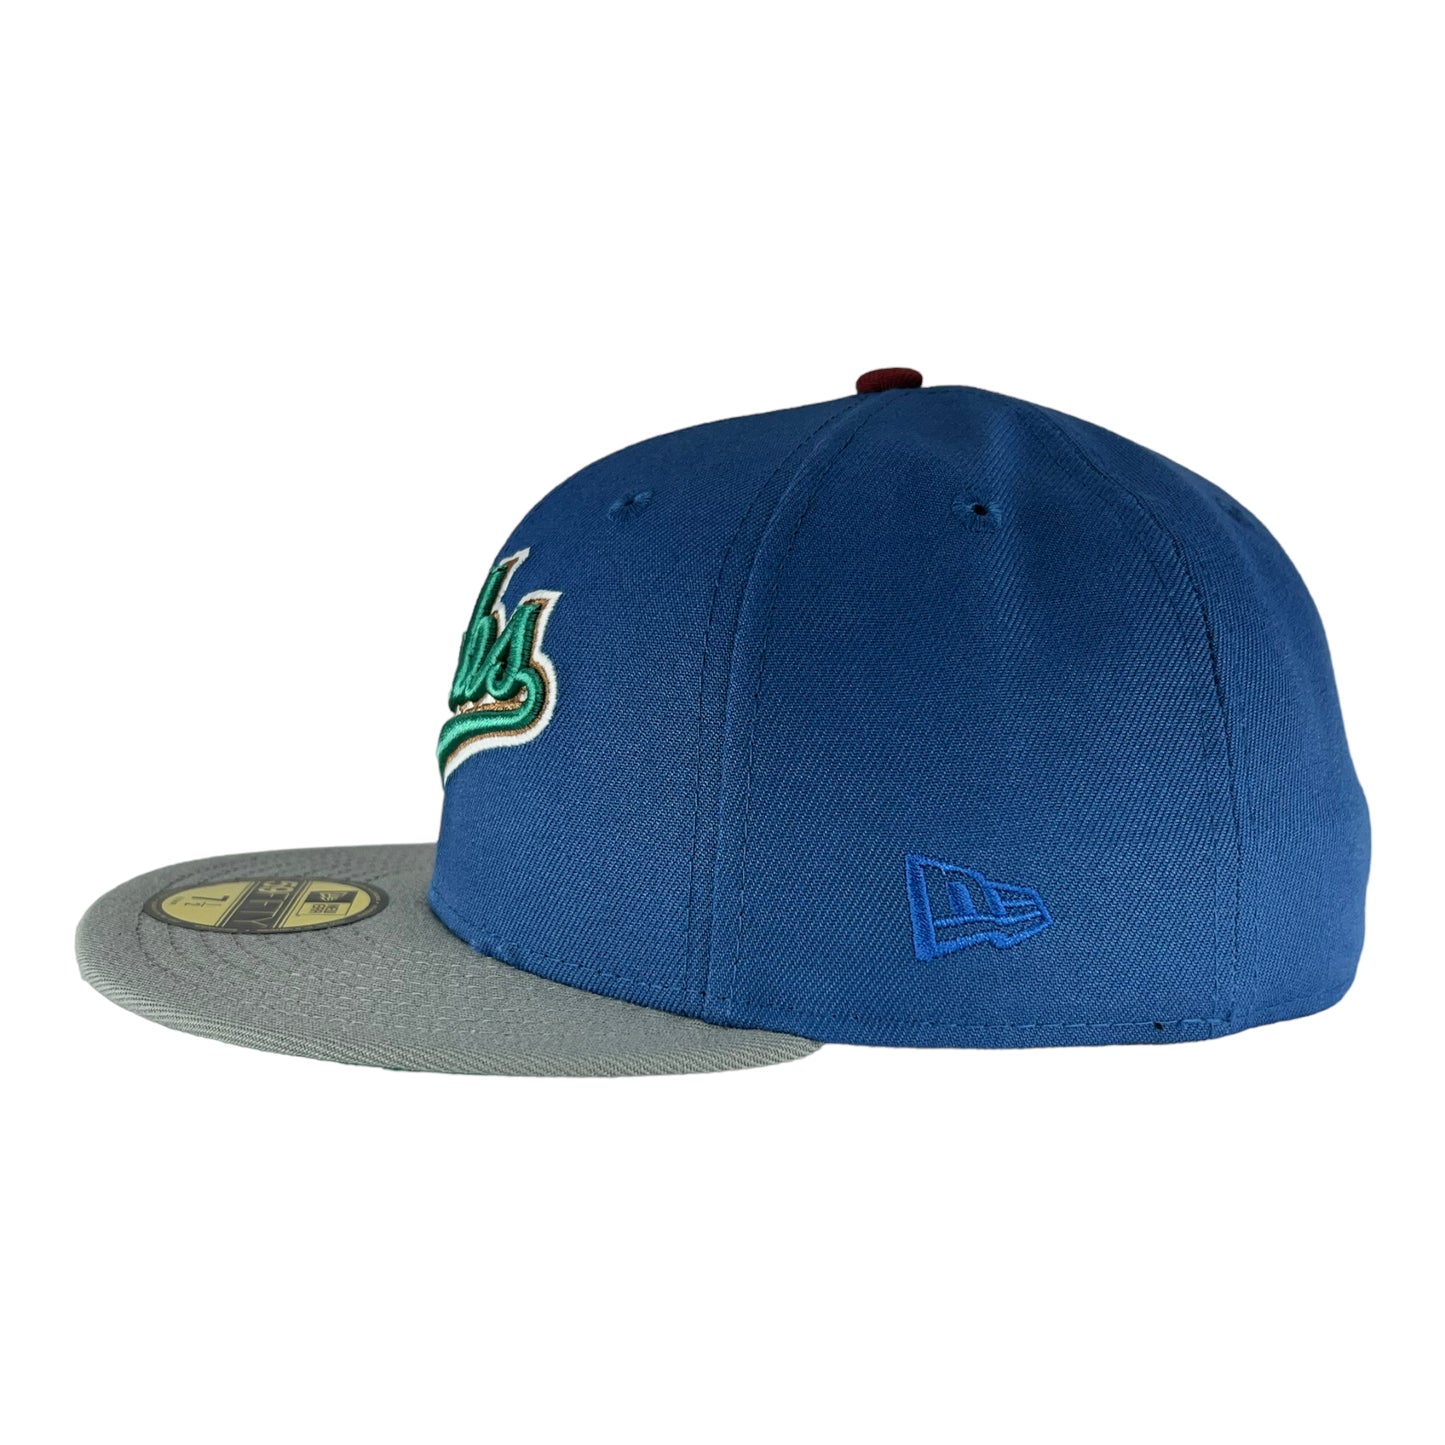 Chicago Cubs Indigo Script New Era 59FIFTY Fitted Hat